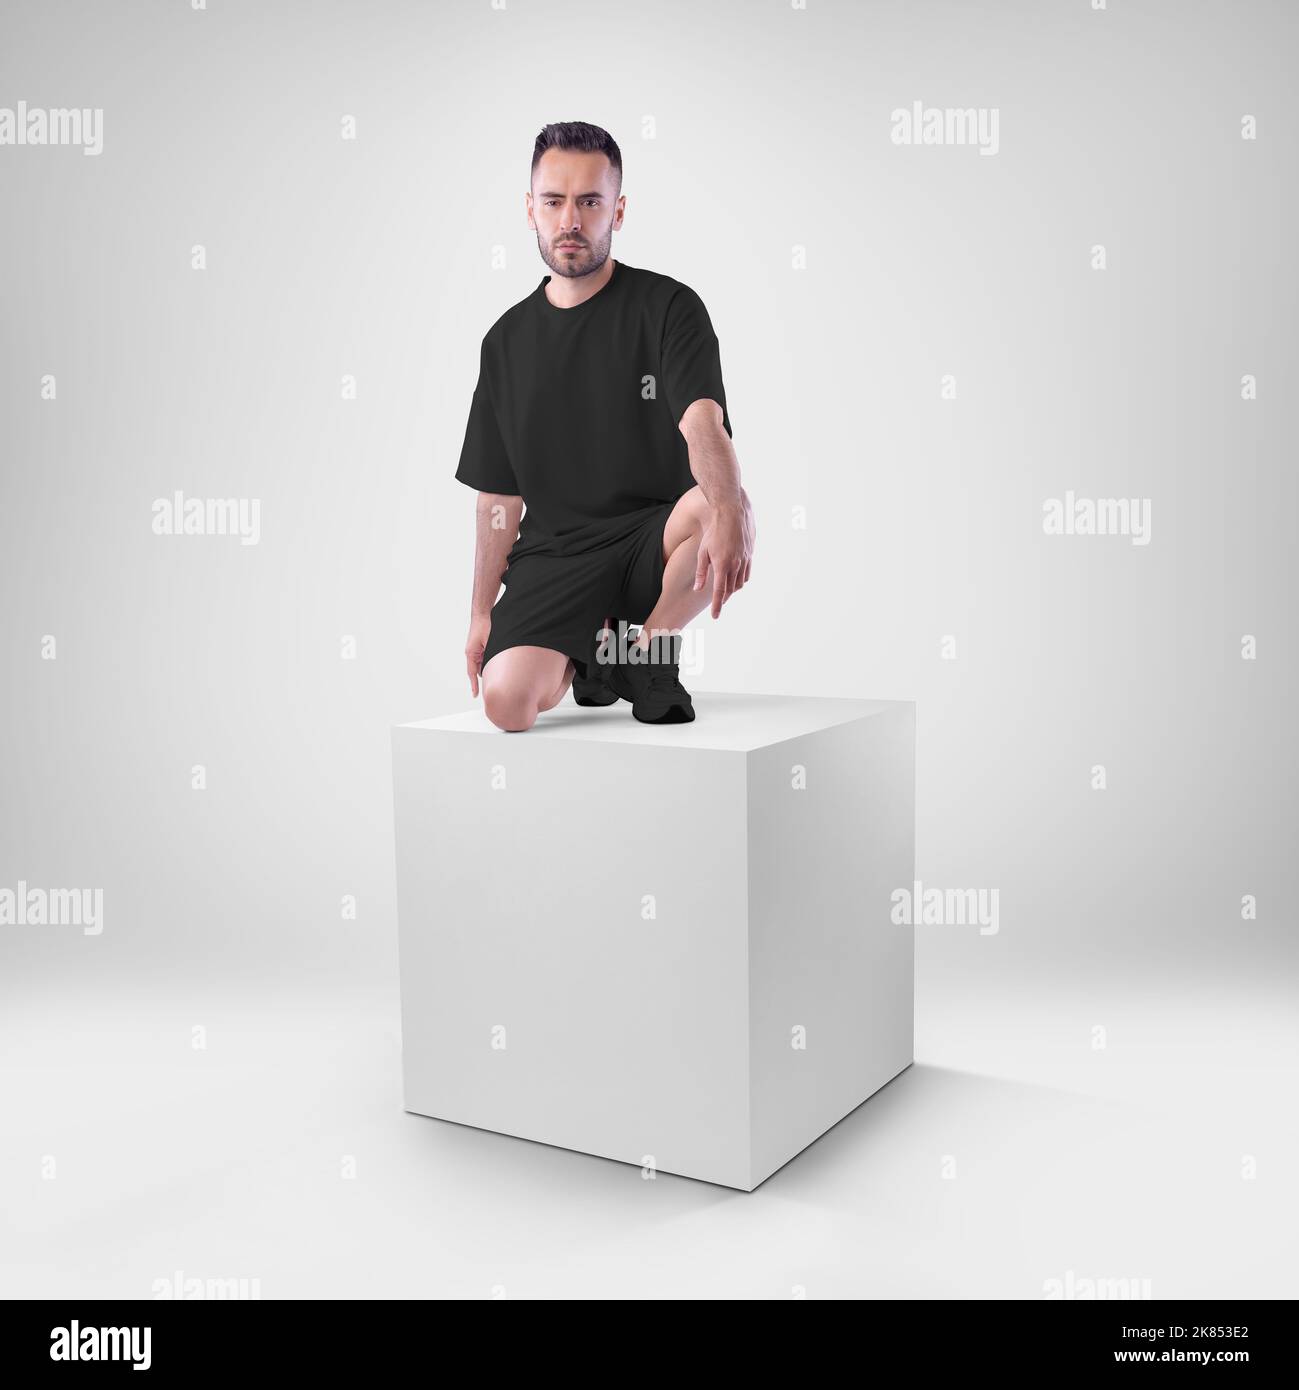 Mockup of black men's suit oversized t-shirt on shorts on man on cube. Clothing template for presentations of design, print, pattern. Stock Photo